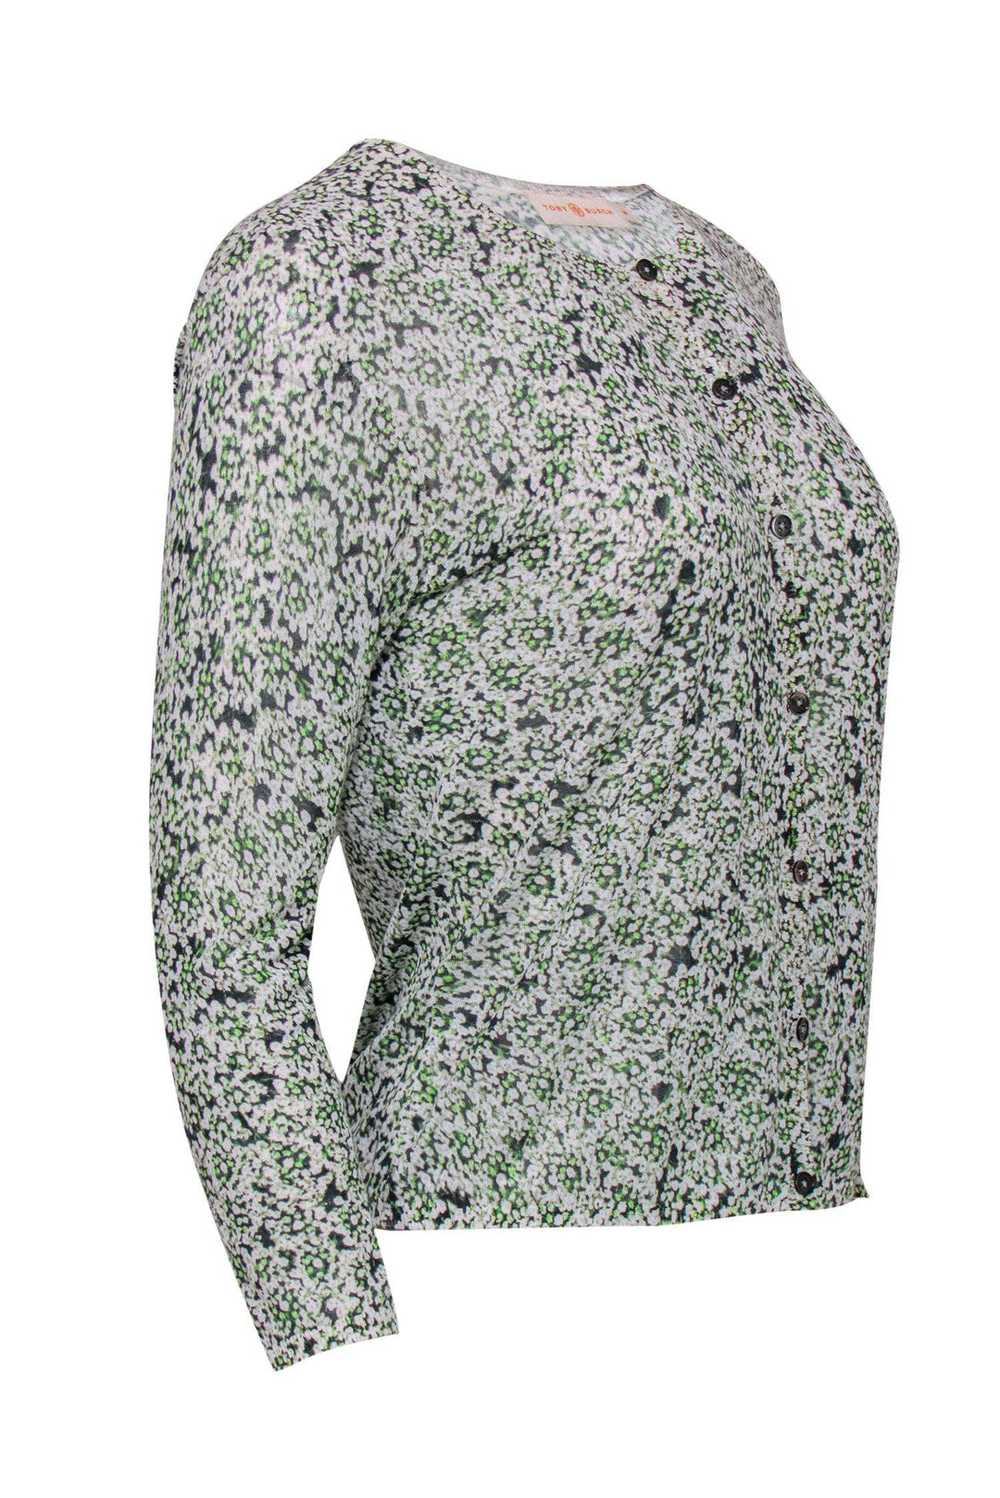 Tory Burch - White & Green Floral Printed Cardiga… - image 2